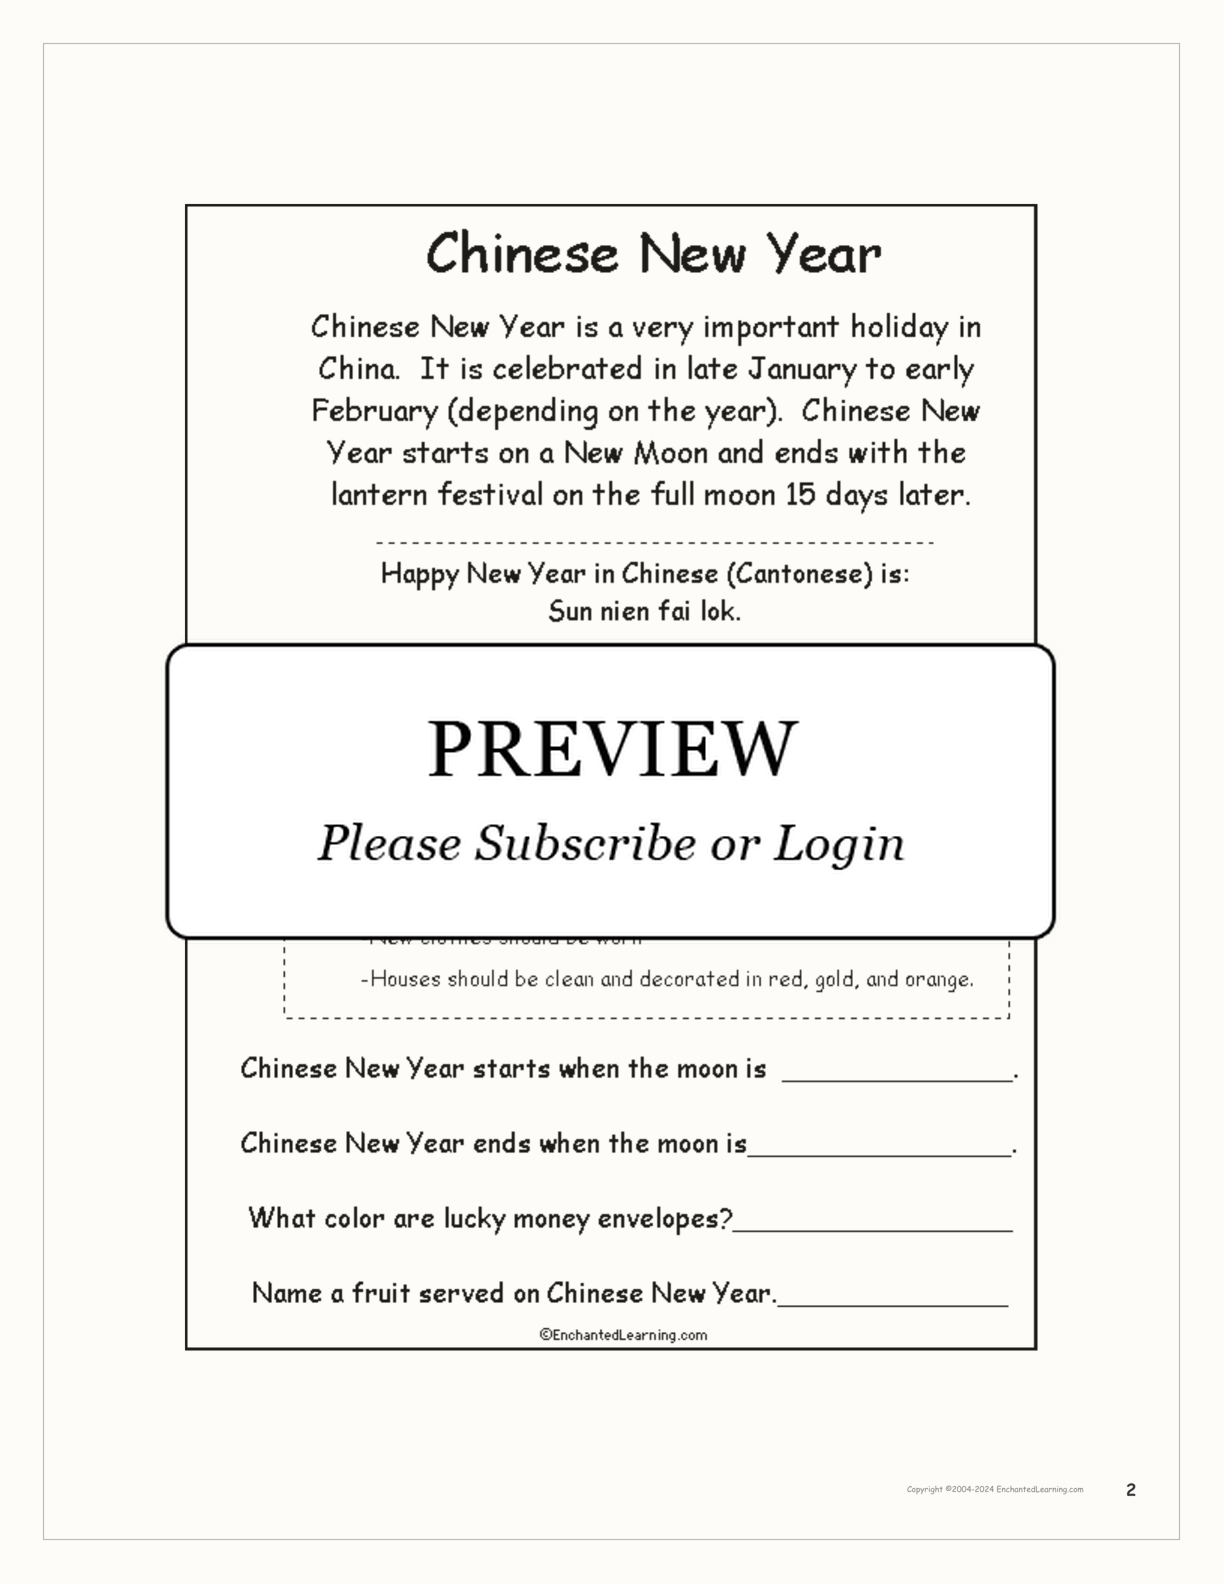 Chinese New Year Activity Book interactive printout page 2